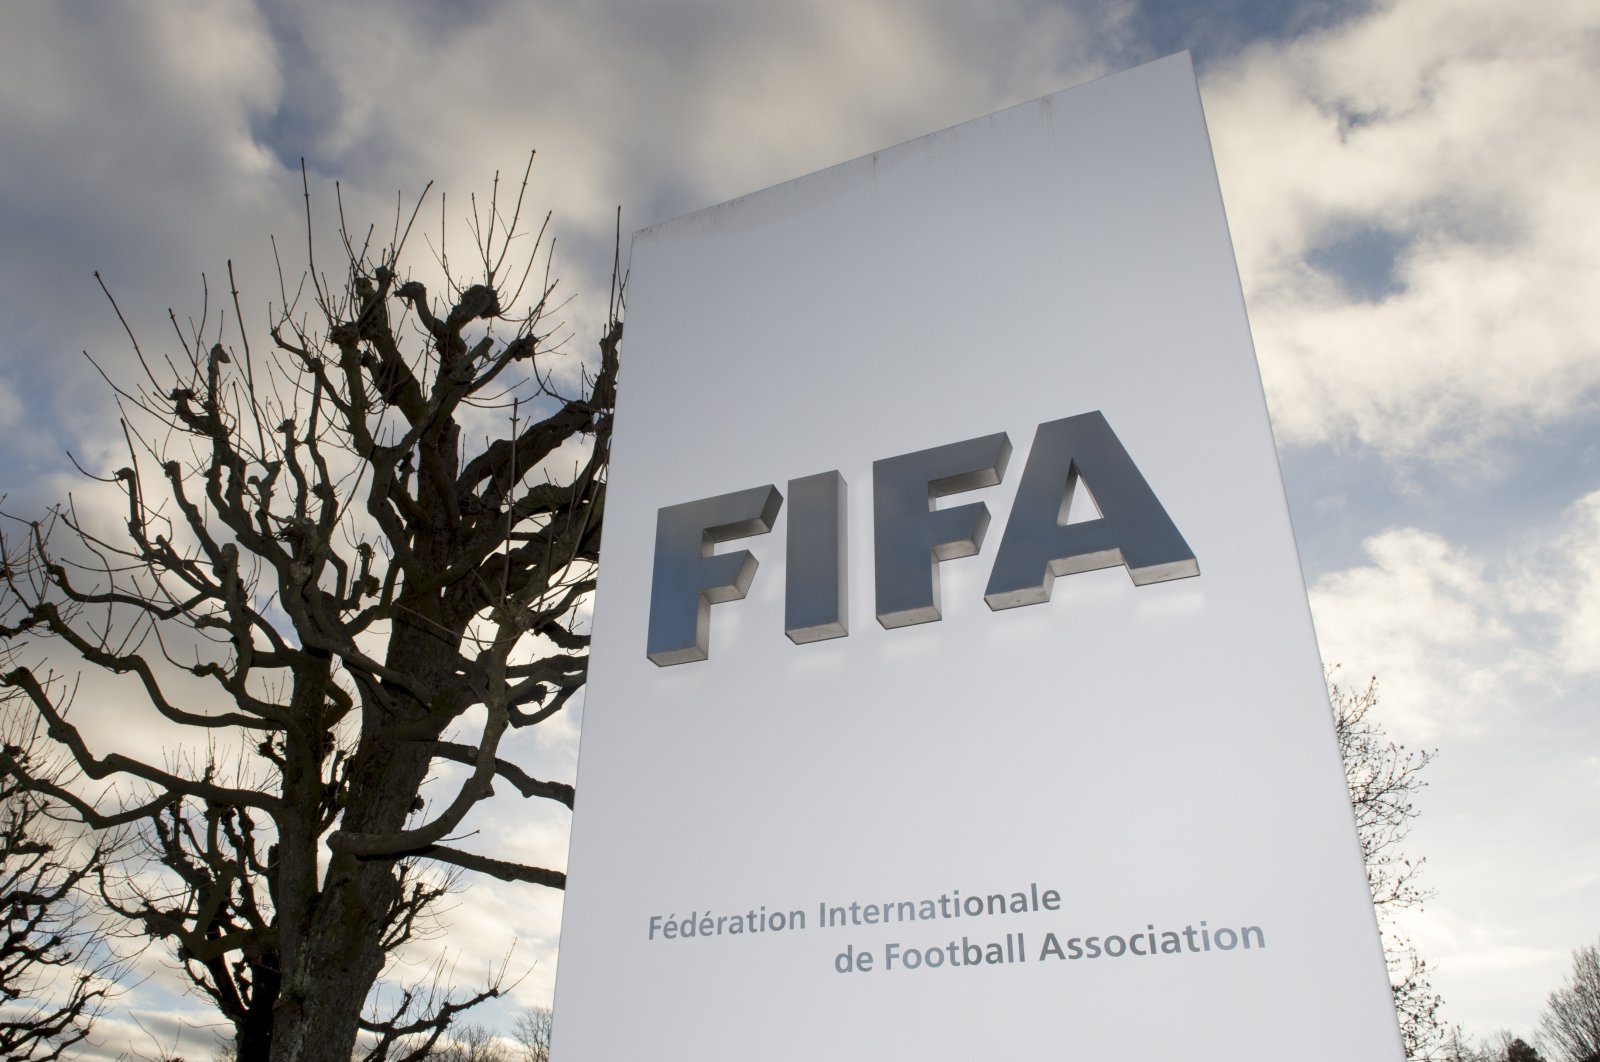 The FIFA logo is pictured outside of the FIFA Headquarters, Zurich, Switzerland, Dec. 17, 2015 (EPA Photo)